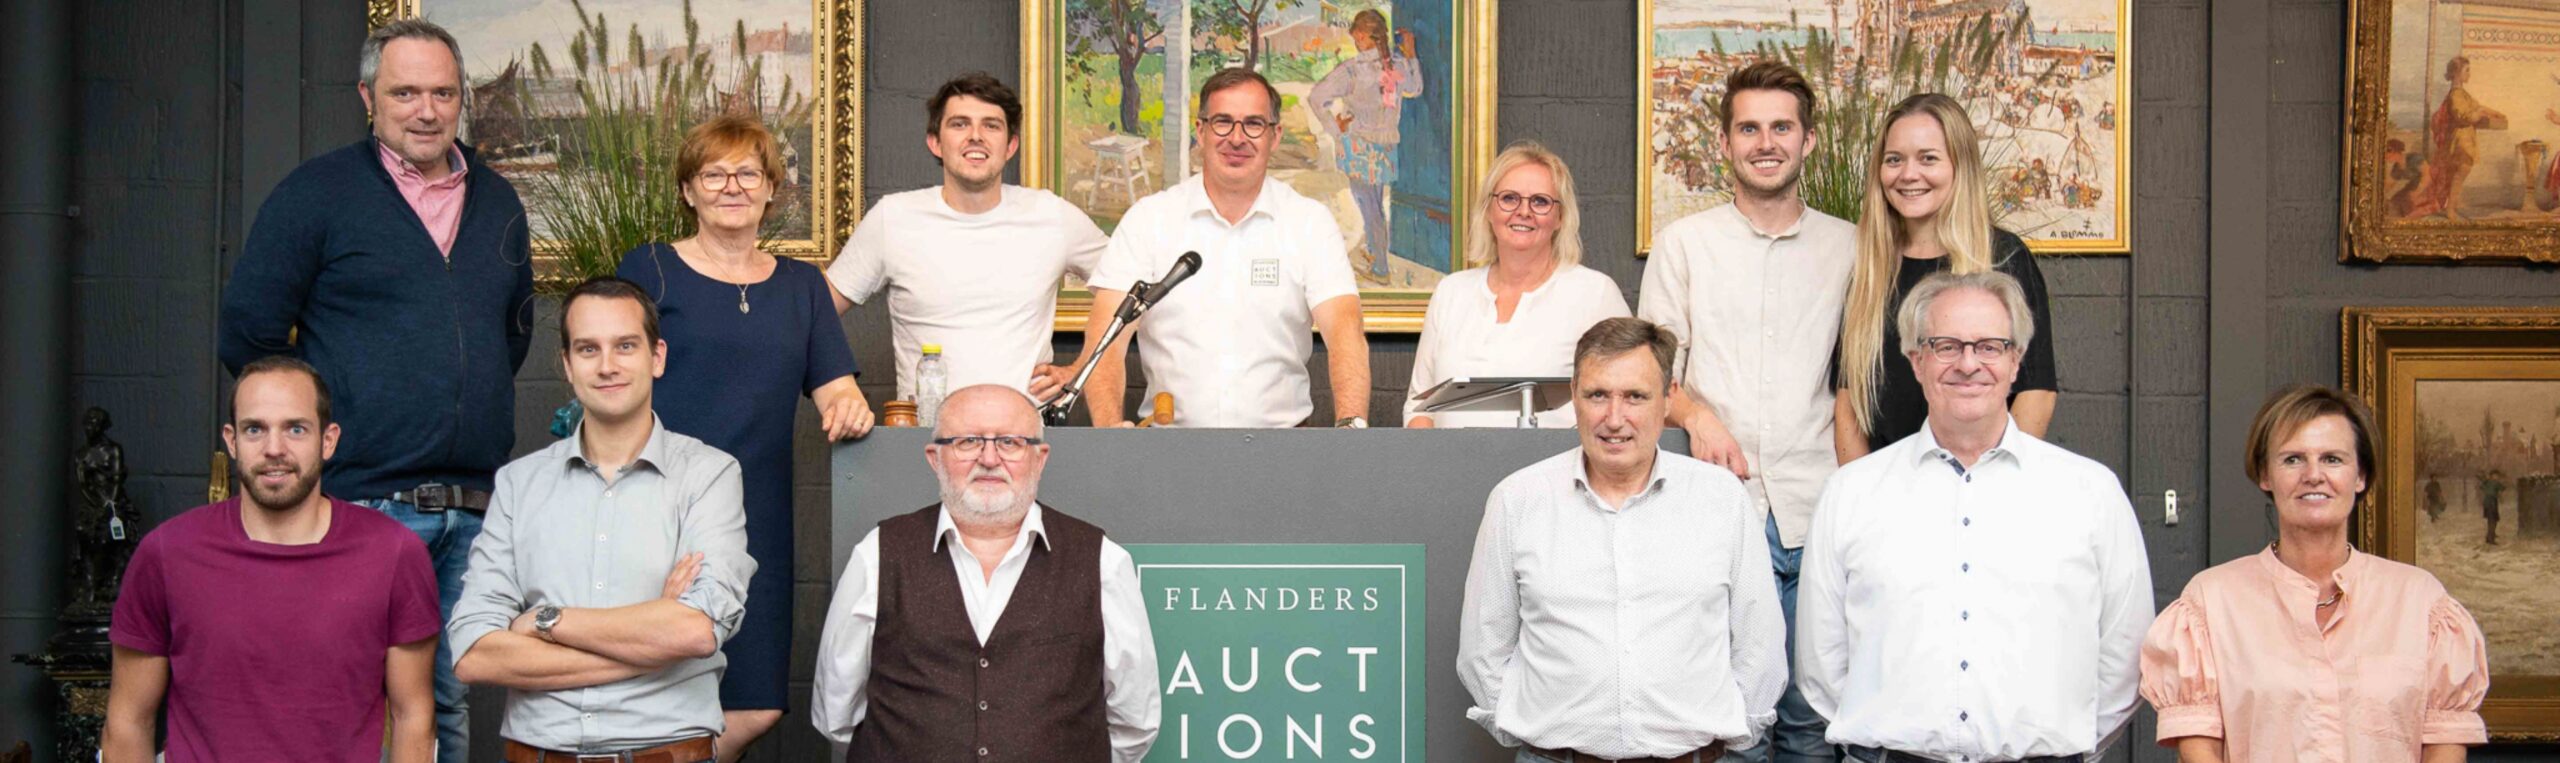 Flanders Auctions TEAM